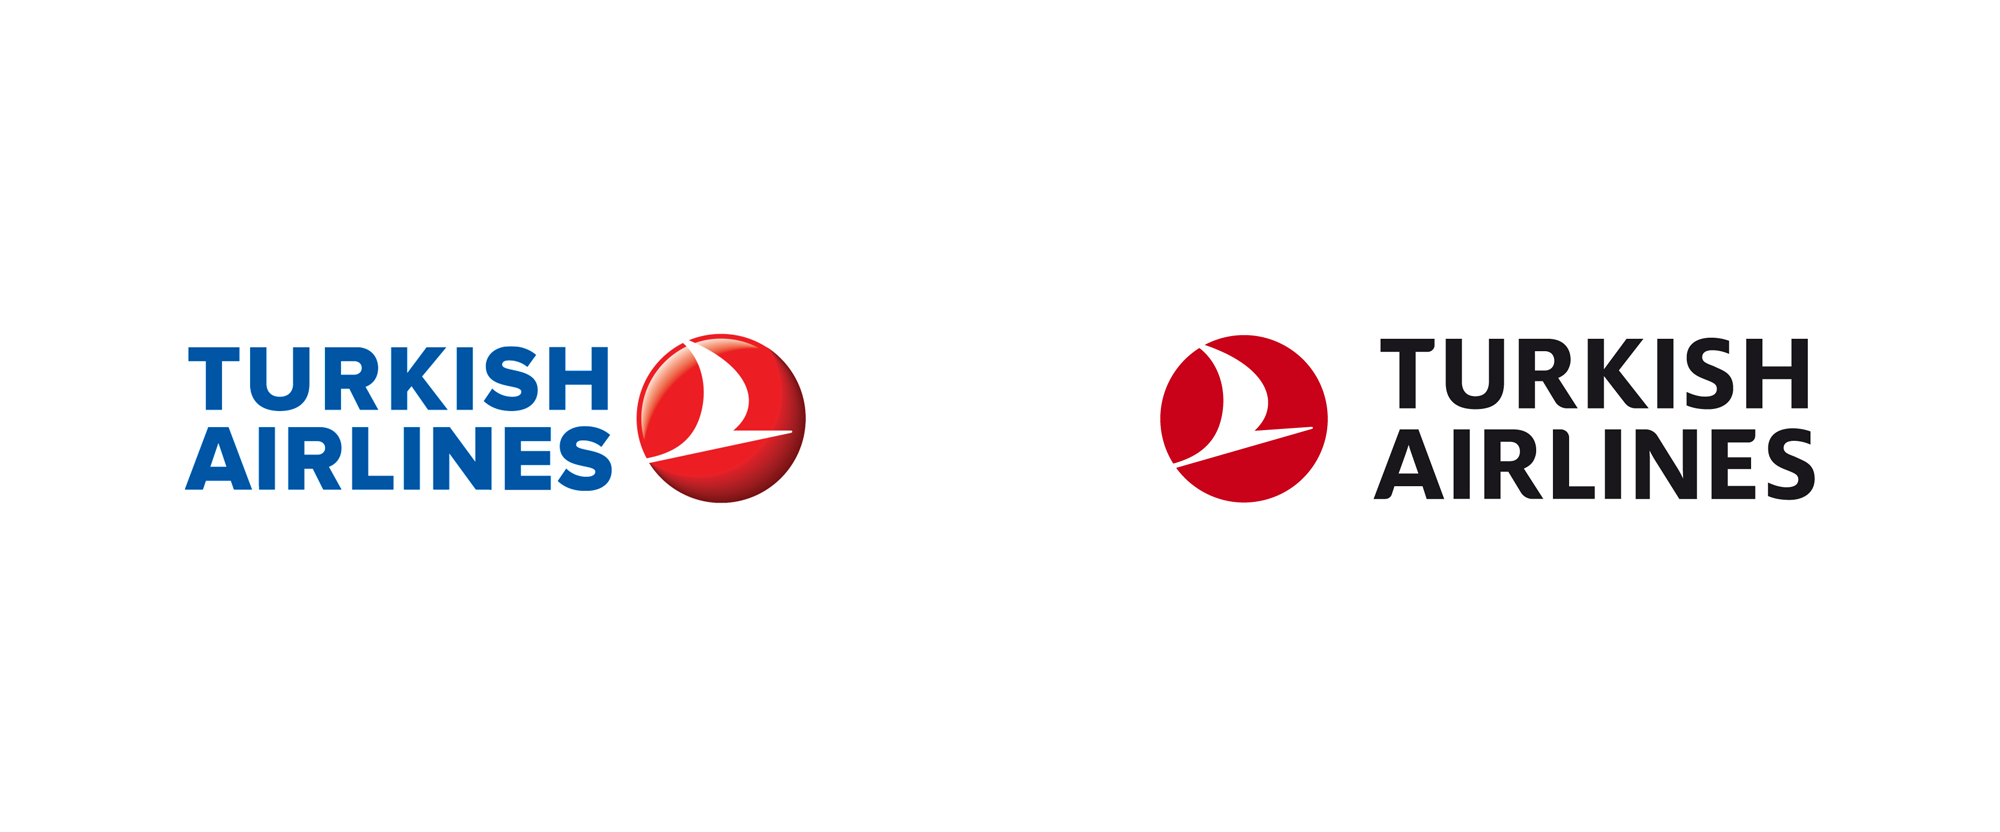 Brand New New Logo And Identity For Turkish Airlines By Imagination